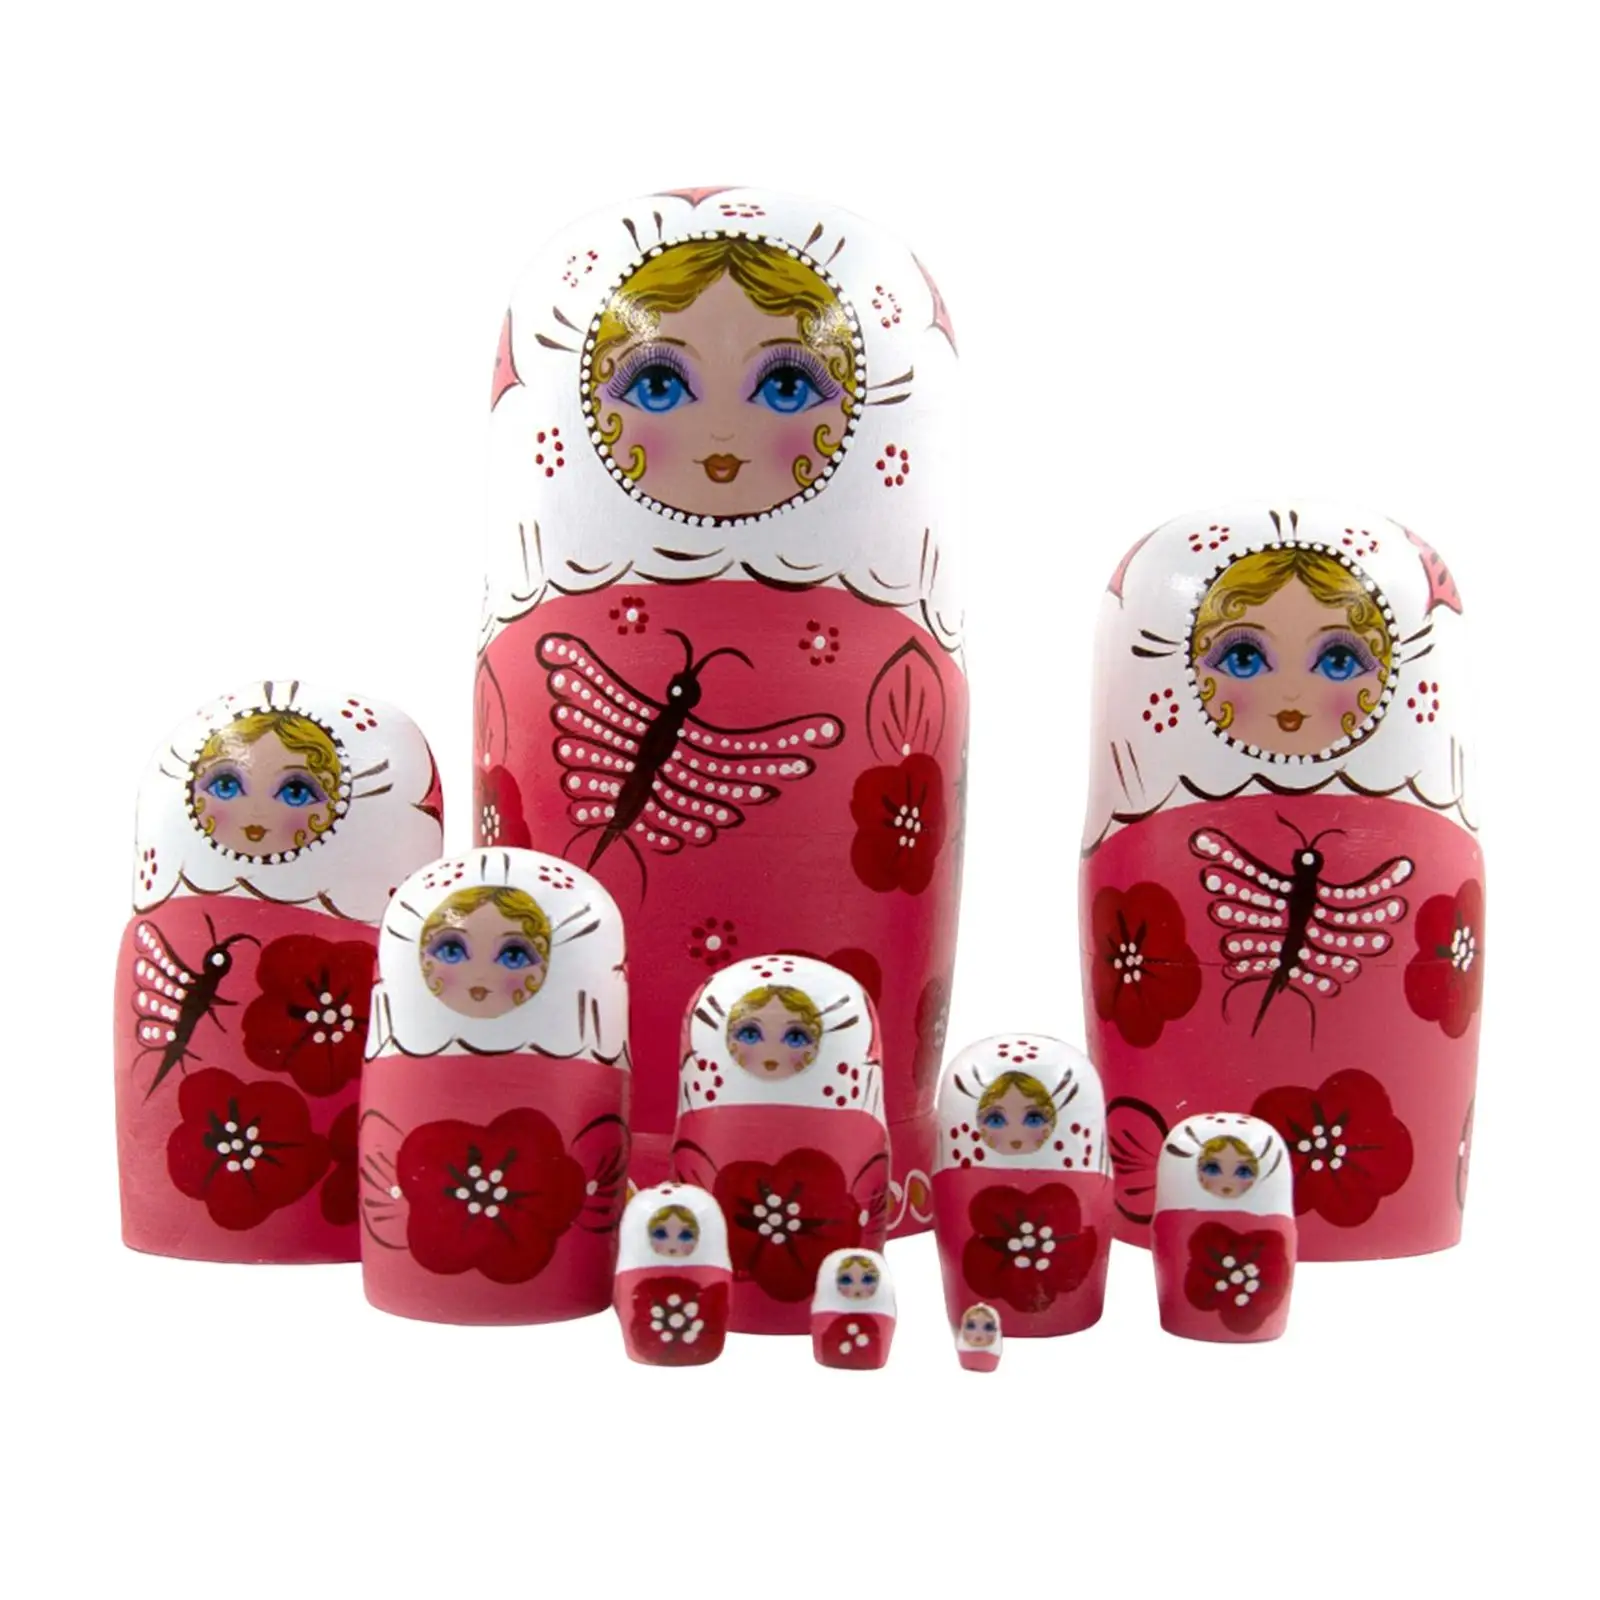 Girls Nesting Dolls   Doll Pink Dragonfly 10 Layers Home Decoration